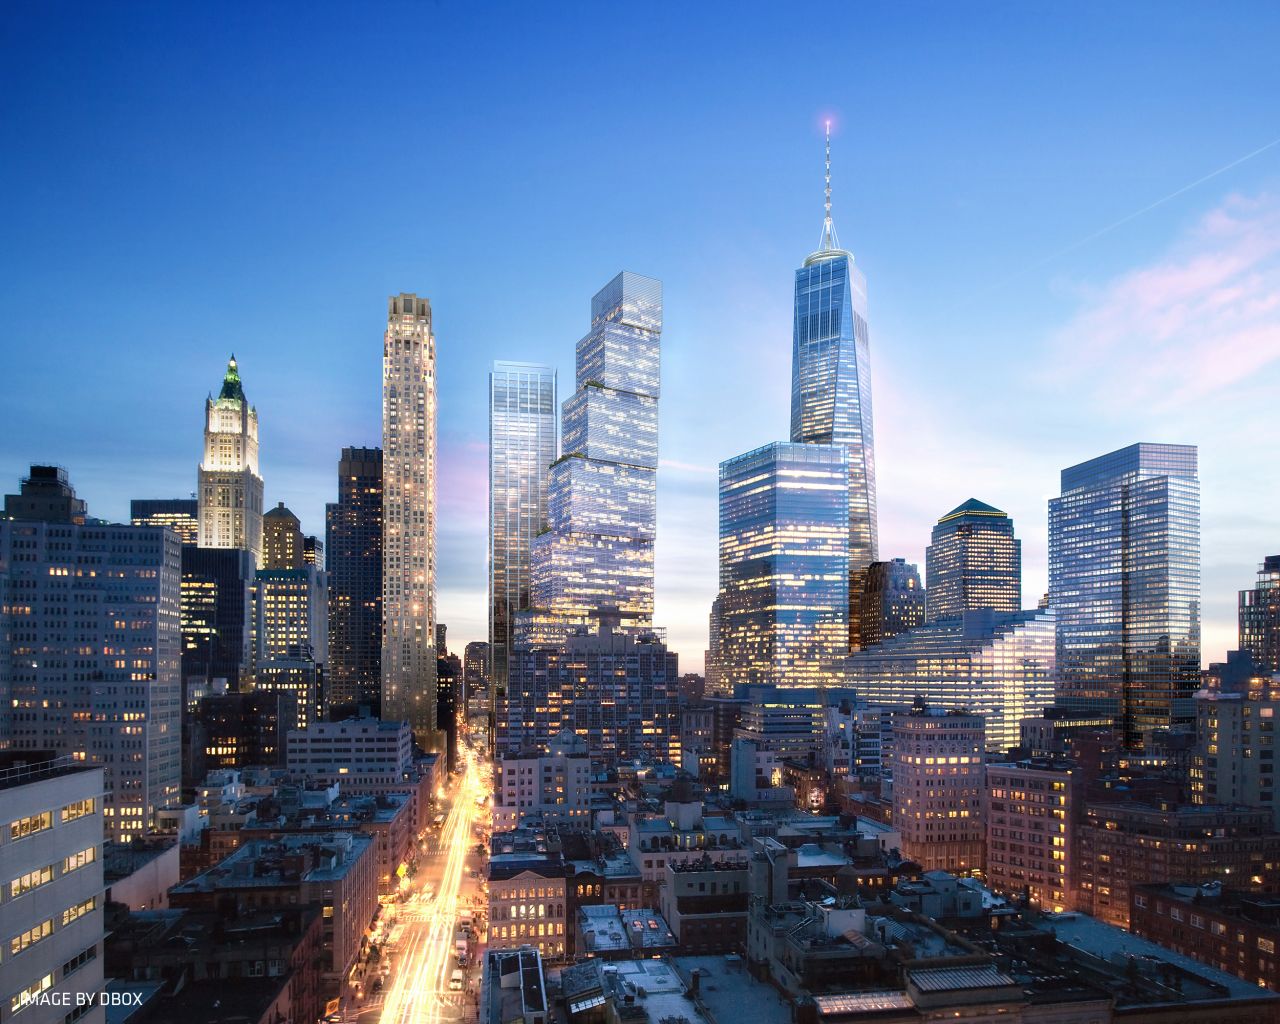 Danish architectural firm<a href="http://www.big.dk/" target="_blank" target="_blank"> Bjarke Ingels Group </a>have revealed the grand designs for the new, 1,340-feet Two World Trade Center building that will overlook the 9/11 Memorial Park in New York City.<br /><br />The building will be completed by 2020 and replaces a previous 79-storey design by London firm Foster + Partners.